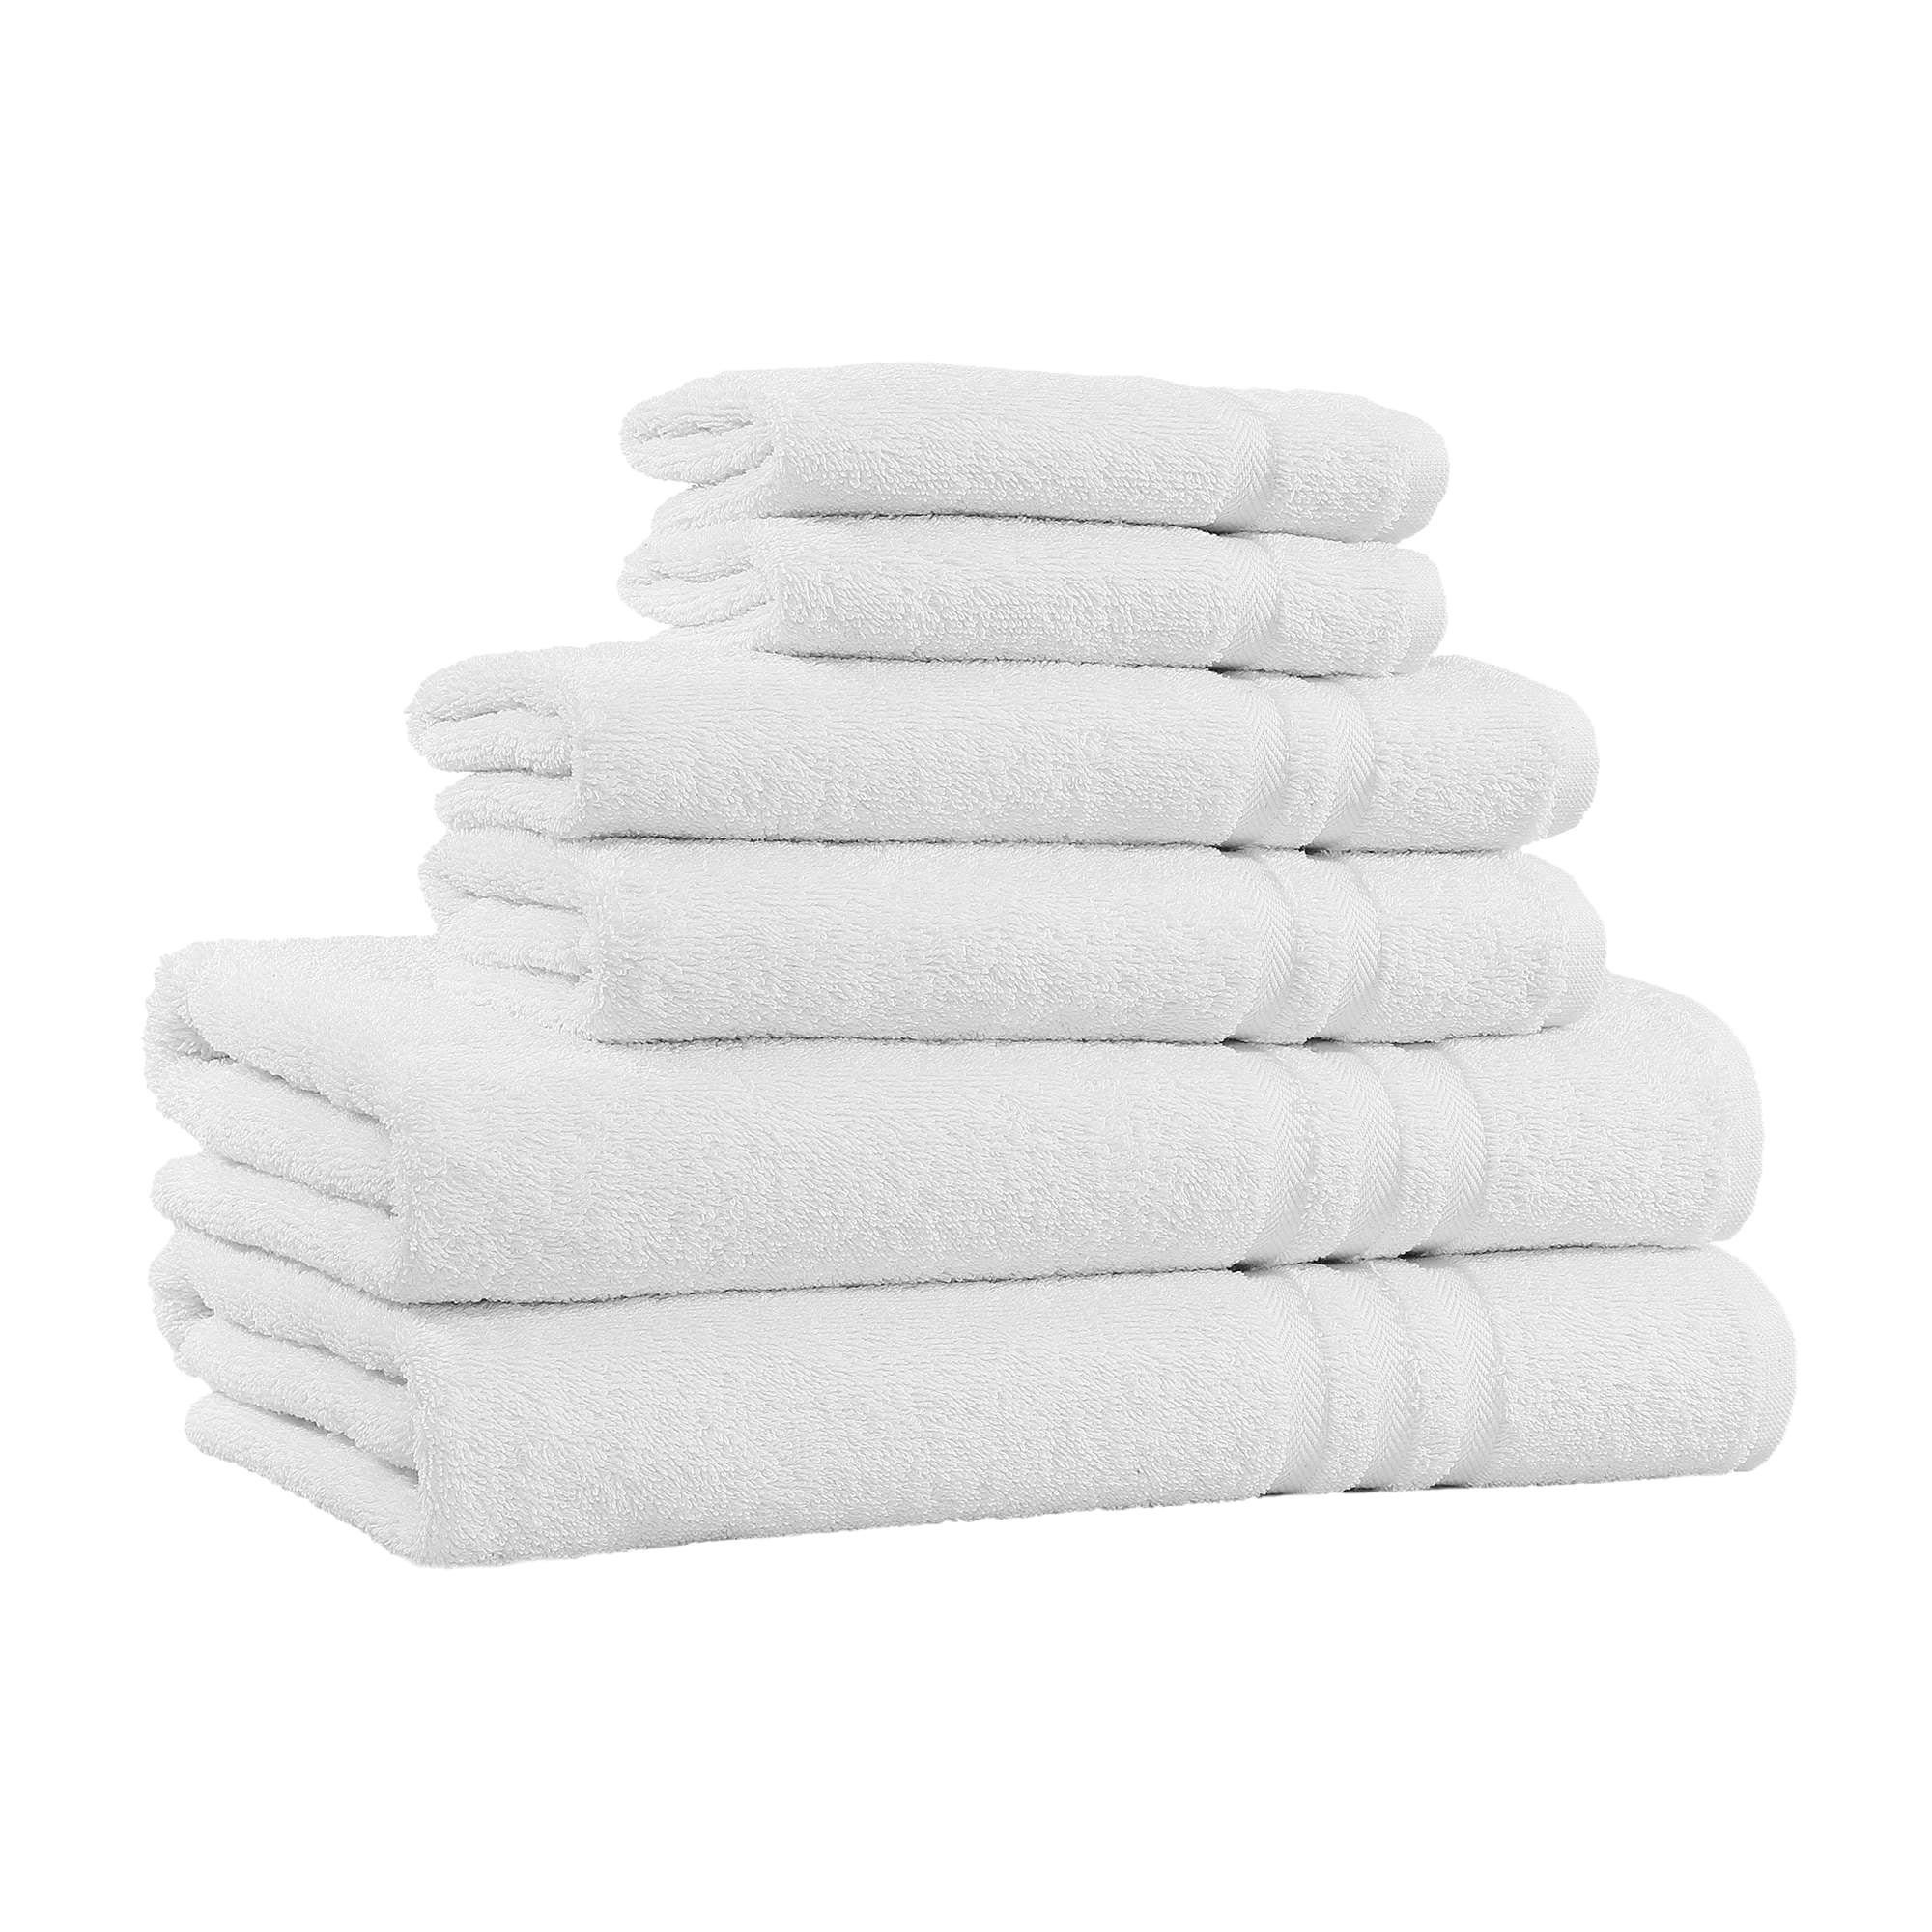 where to buy towels near me